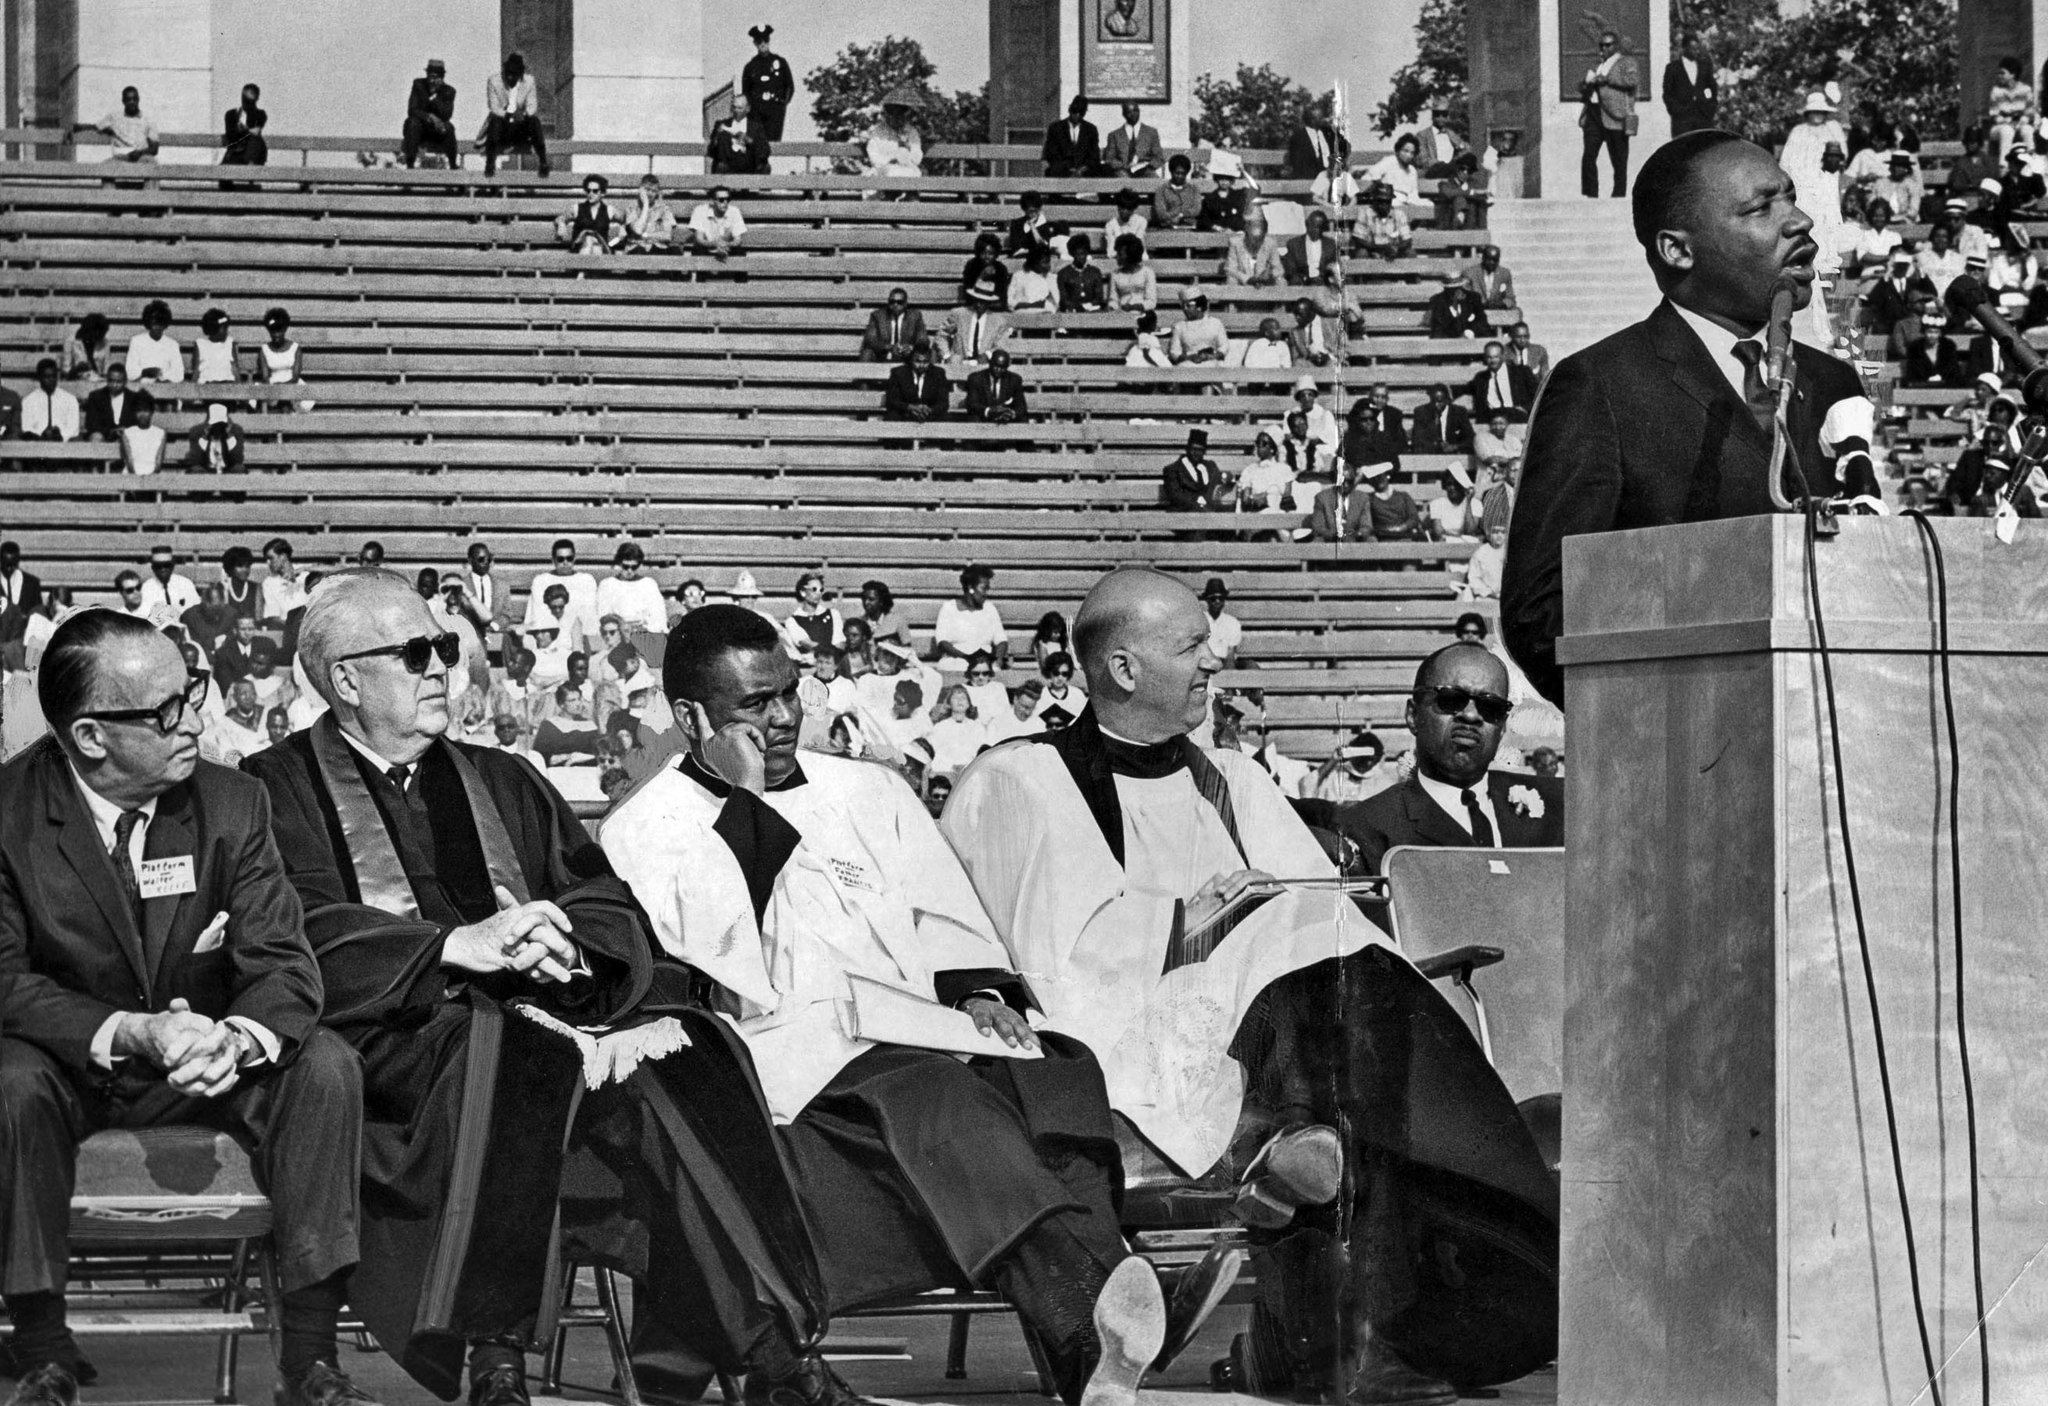 May 31, 1964: Dr. Martin Luther King, Jr. speaks at a civil rights rally at the Memorial Coliseum.